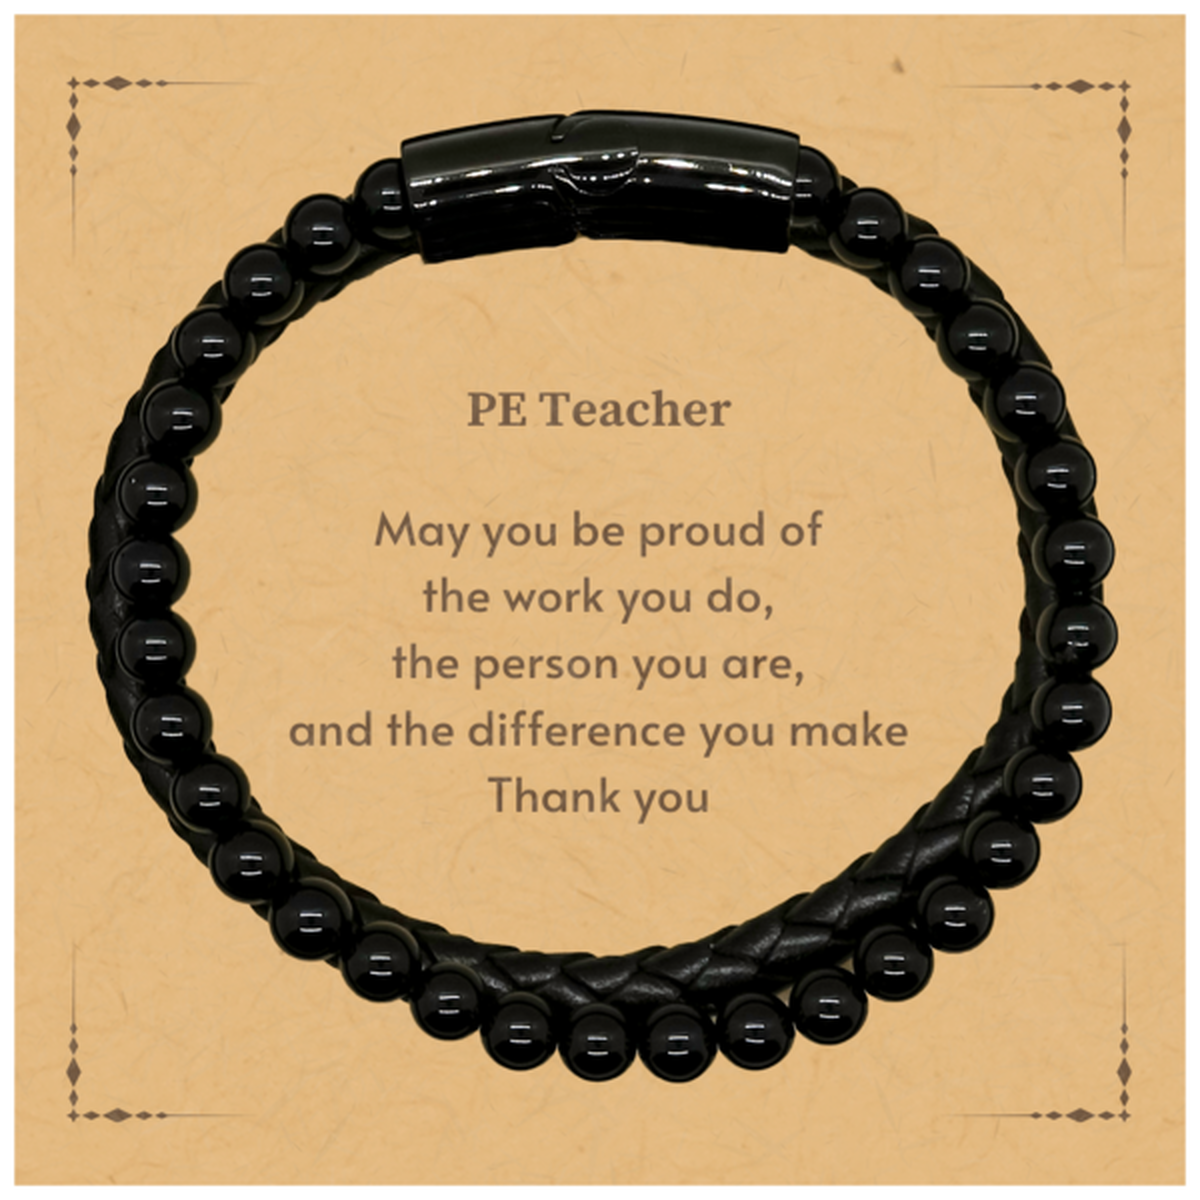 Heartwarming Stone Leather Bracelets Retirement Coworkers Gifts for PE Teacher, PE Teacher May You be proud of the work you do, the person you are Gifts for Boss Men Women Friends